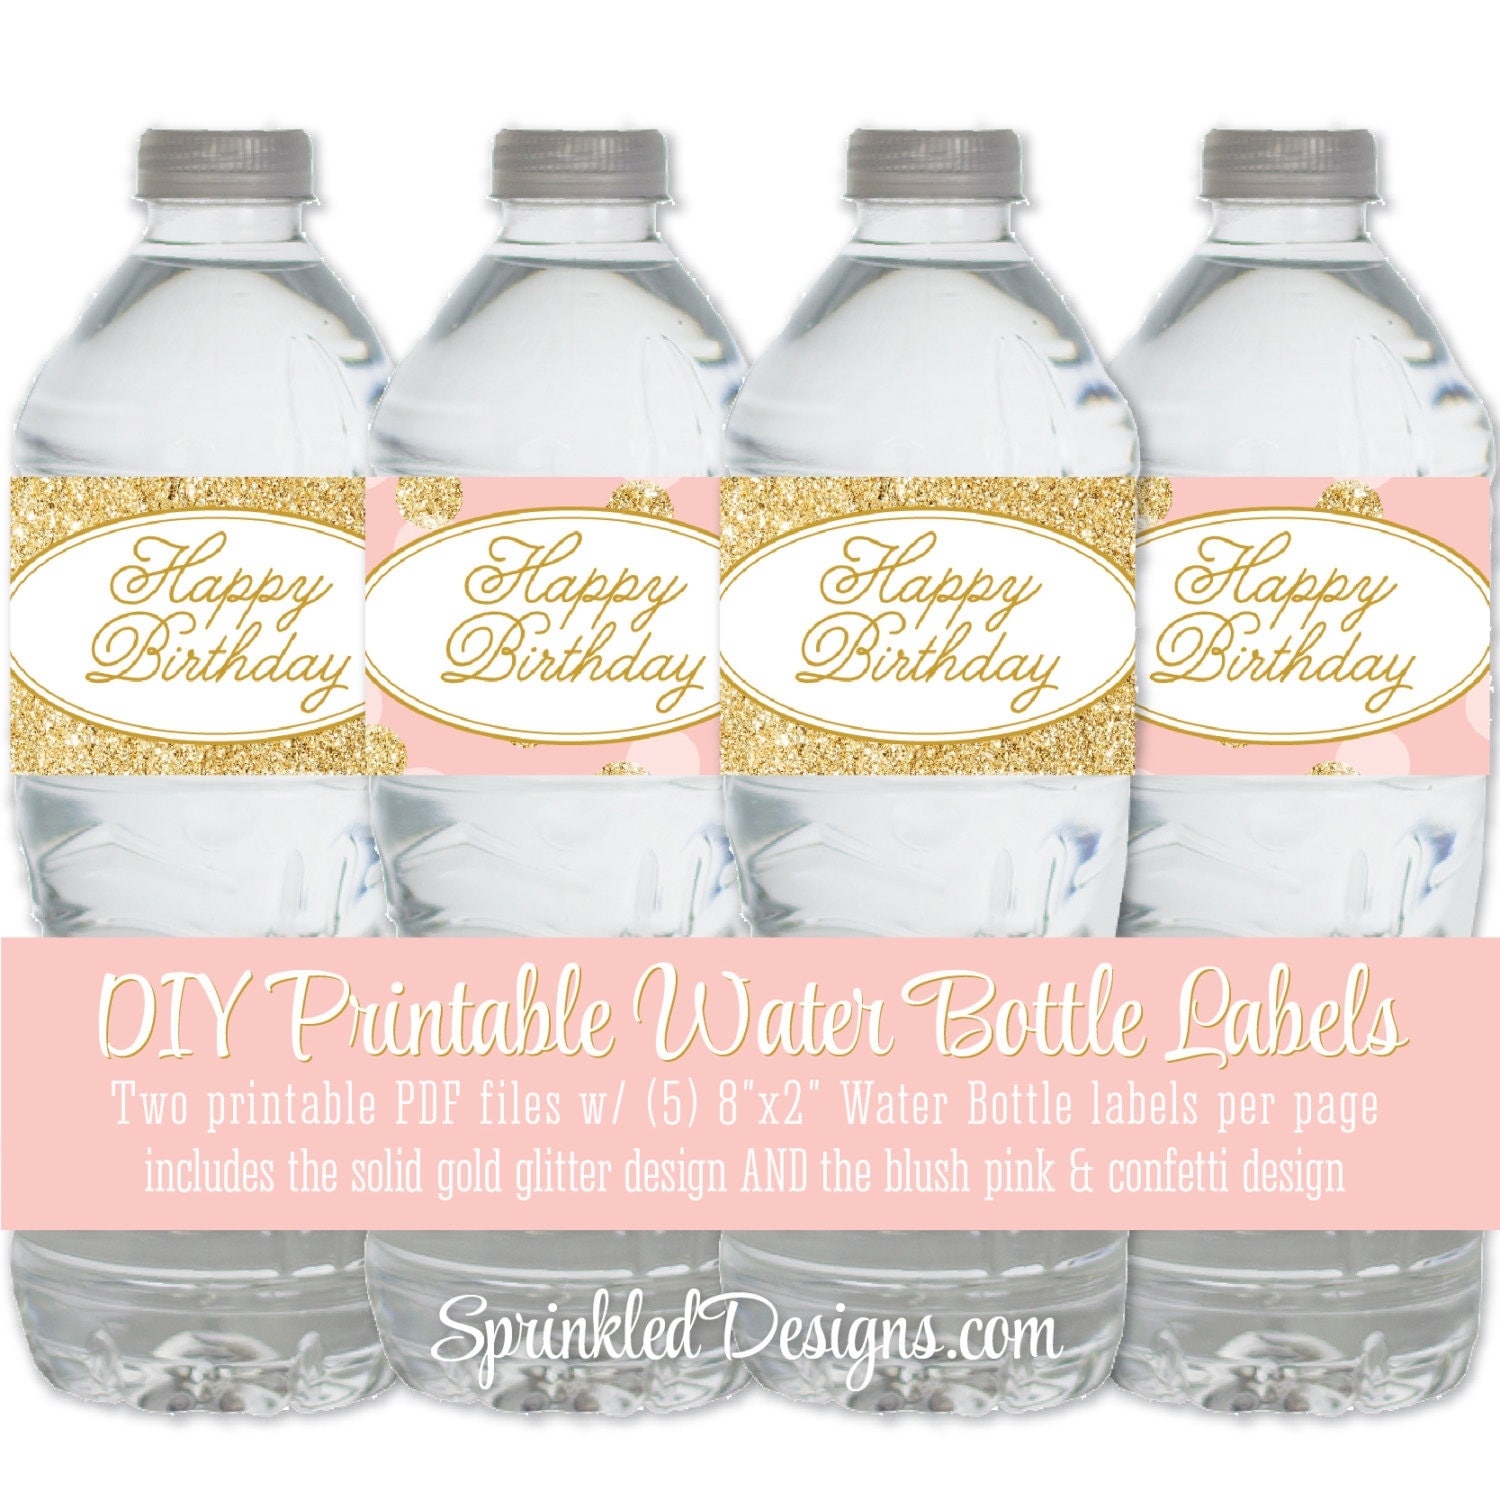 Happy Birthday Free Printable Water Bottle Labels For Birthday